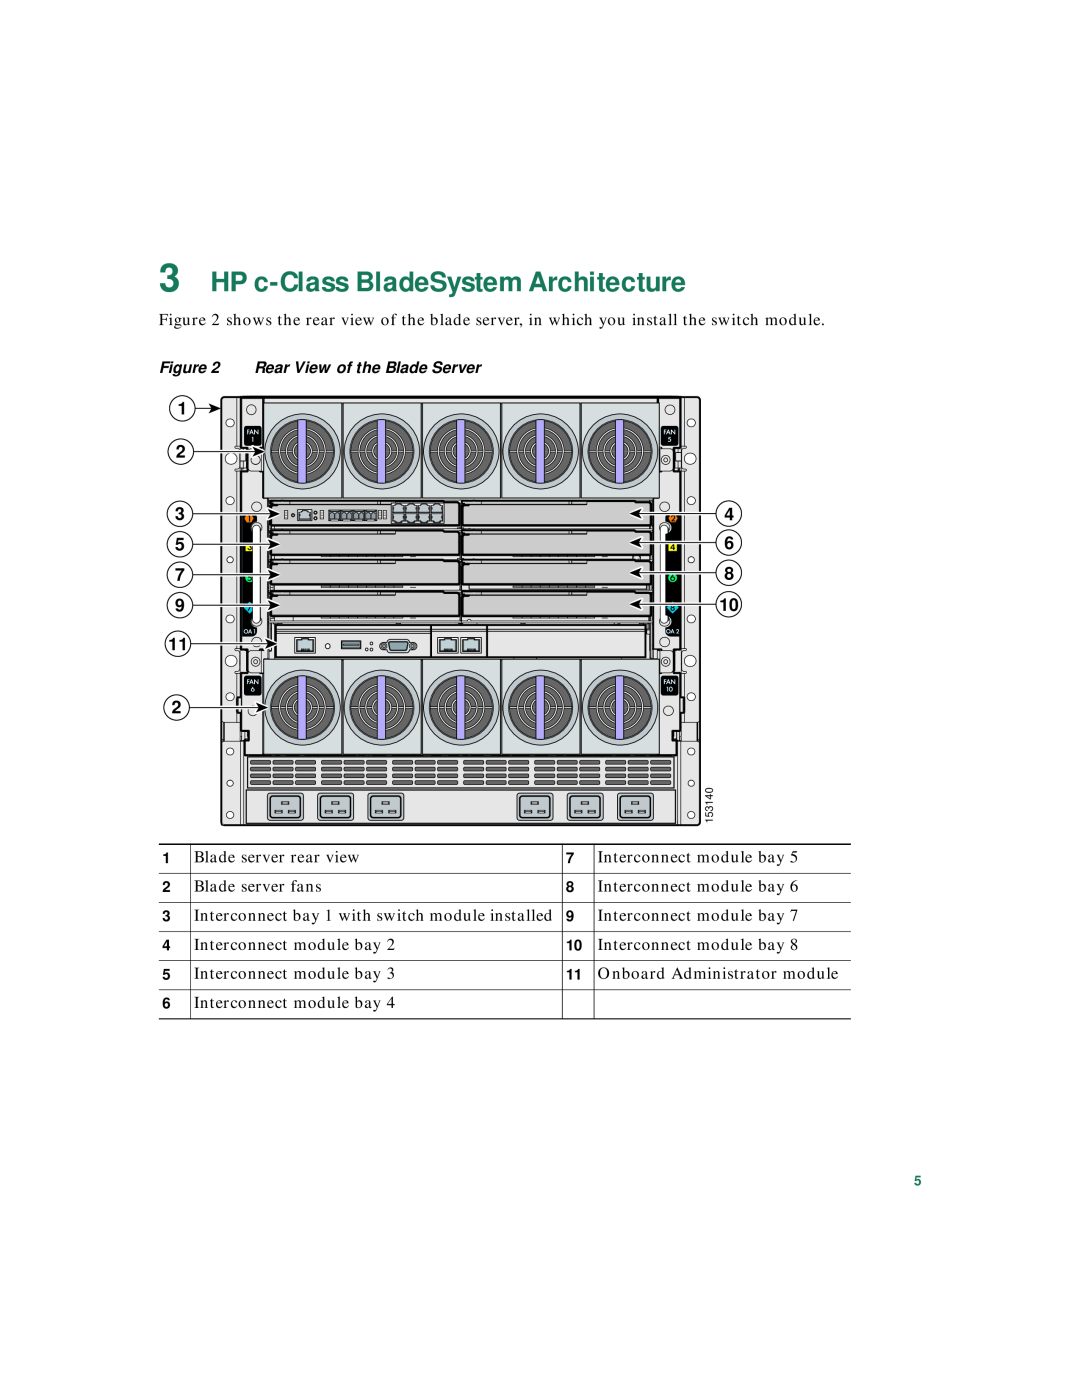 Cisco Systems 3020 warranty HP c-Class BladeSystem Architecture, Rear View of the Blade Server 